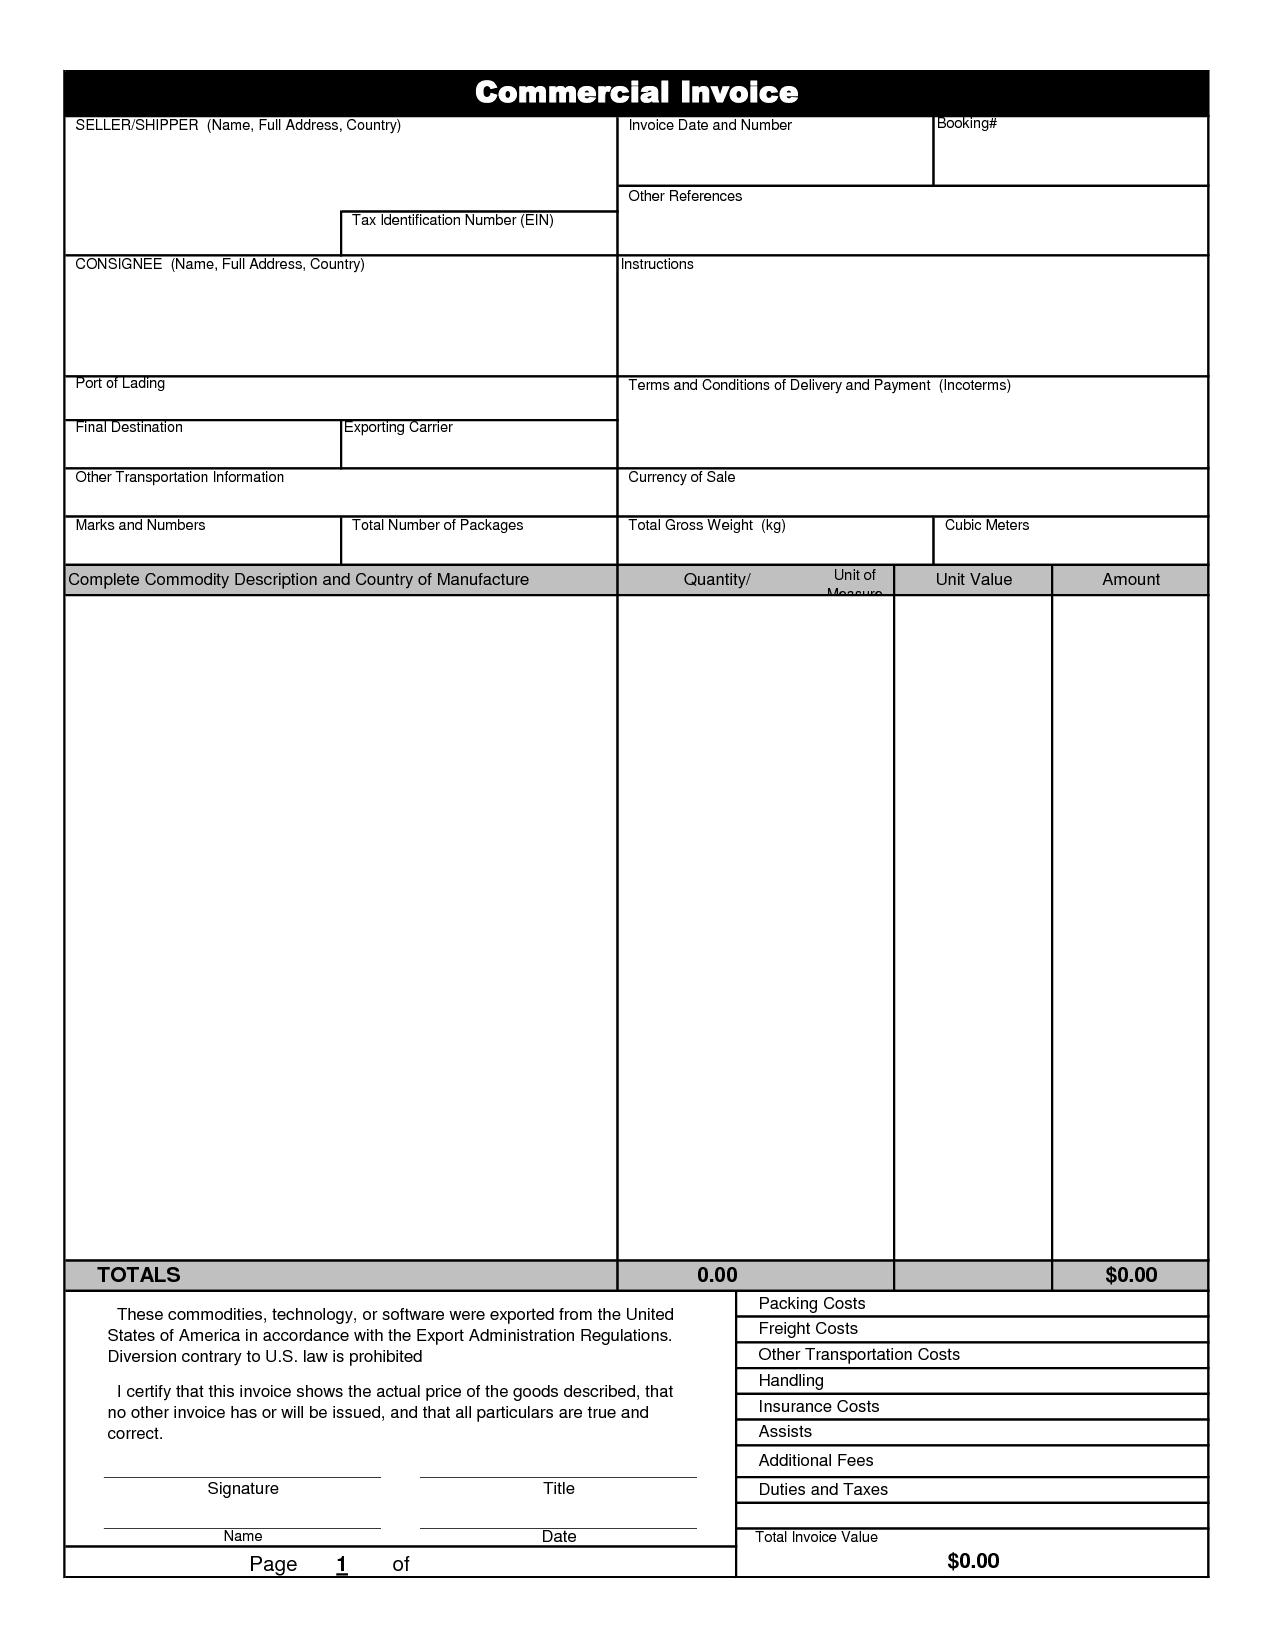 Doc.#9081098: Free UPS Commercial Invoice Template Excel PDF 